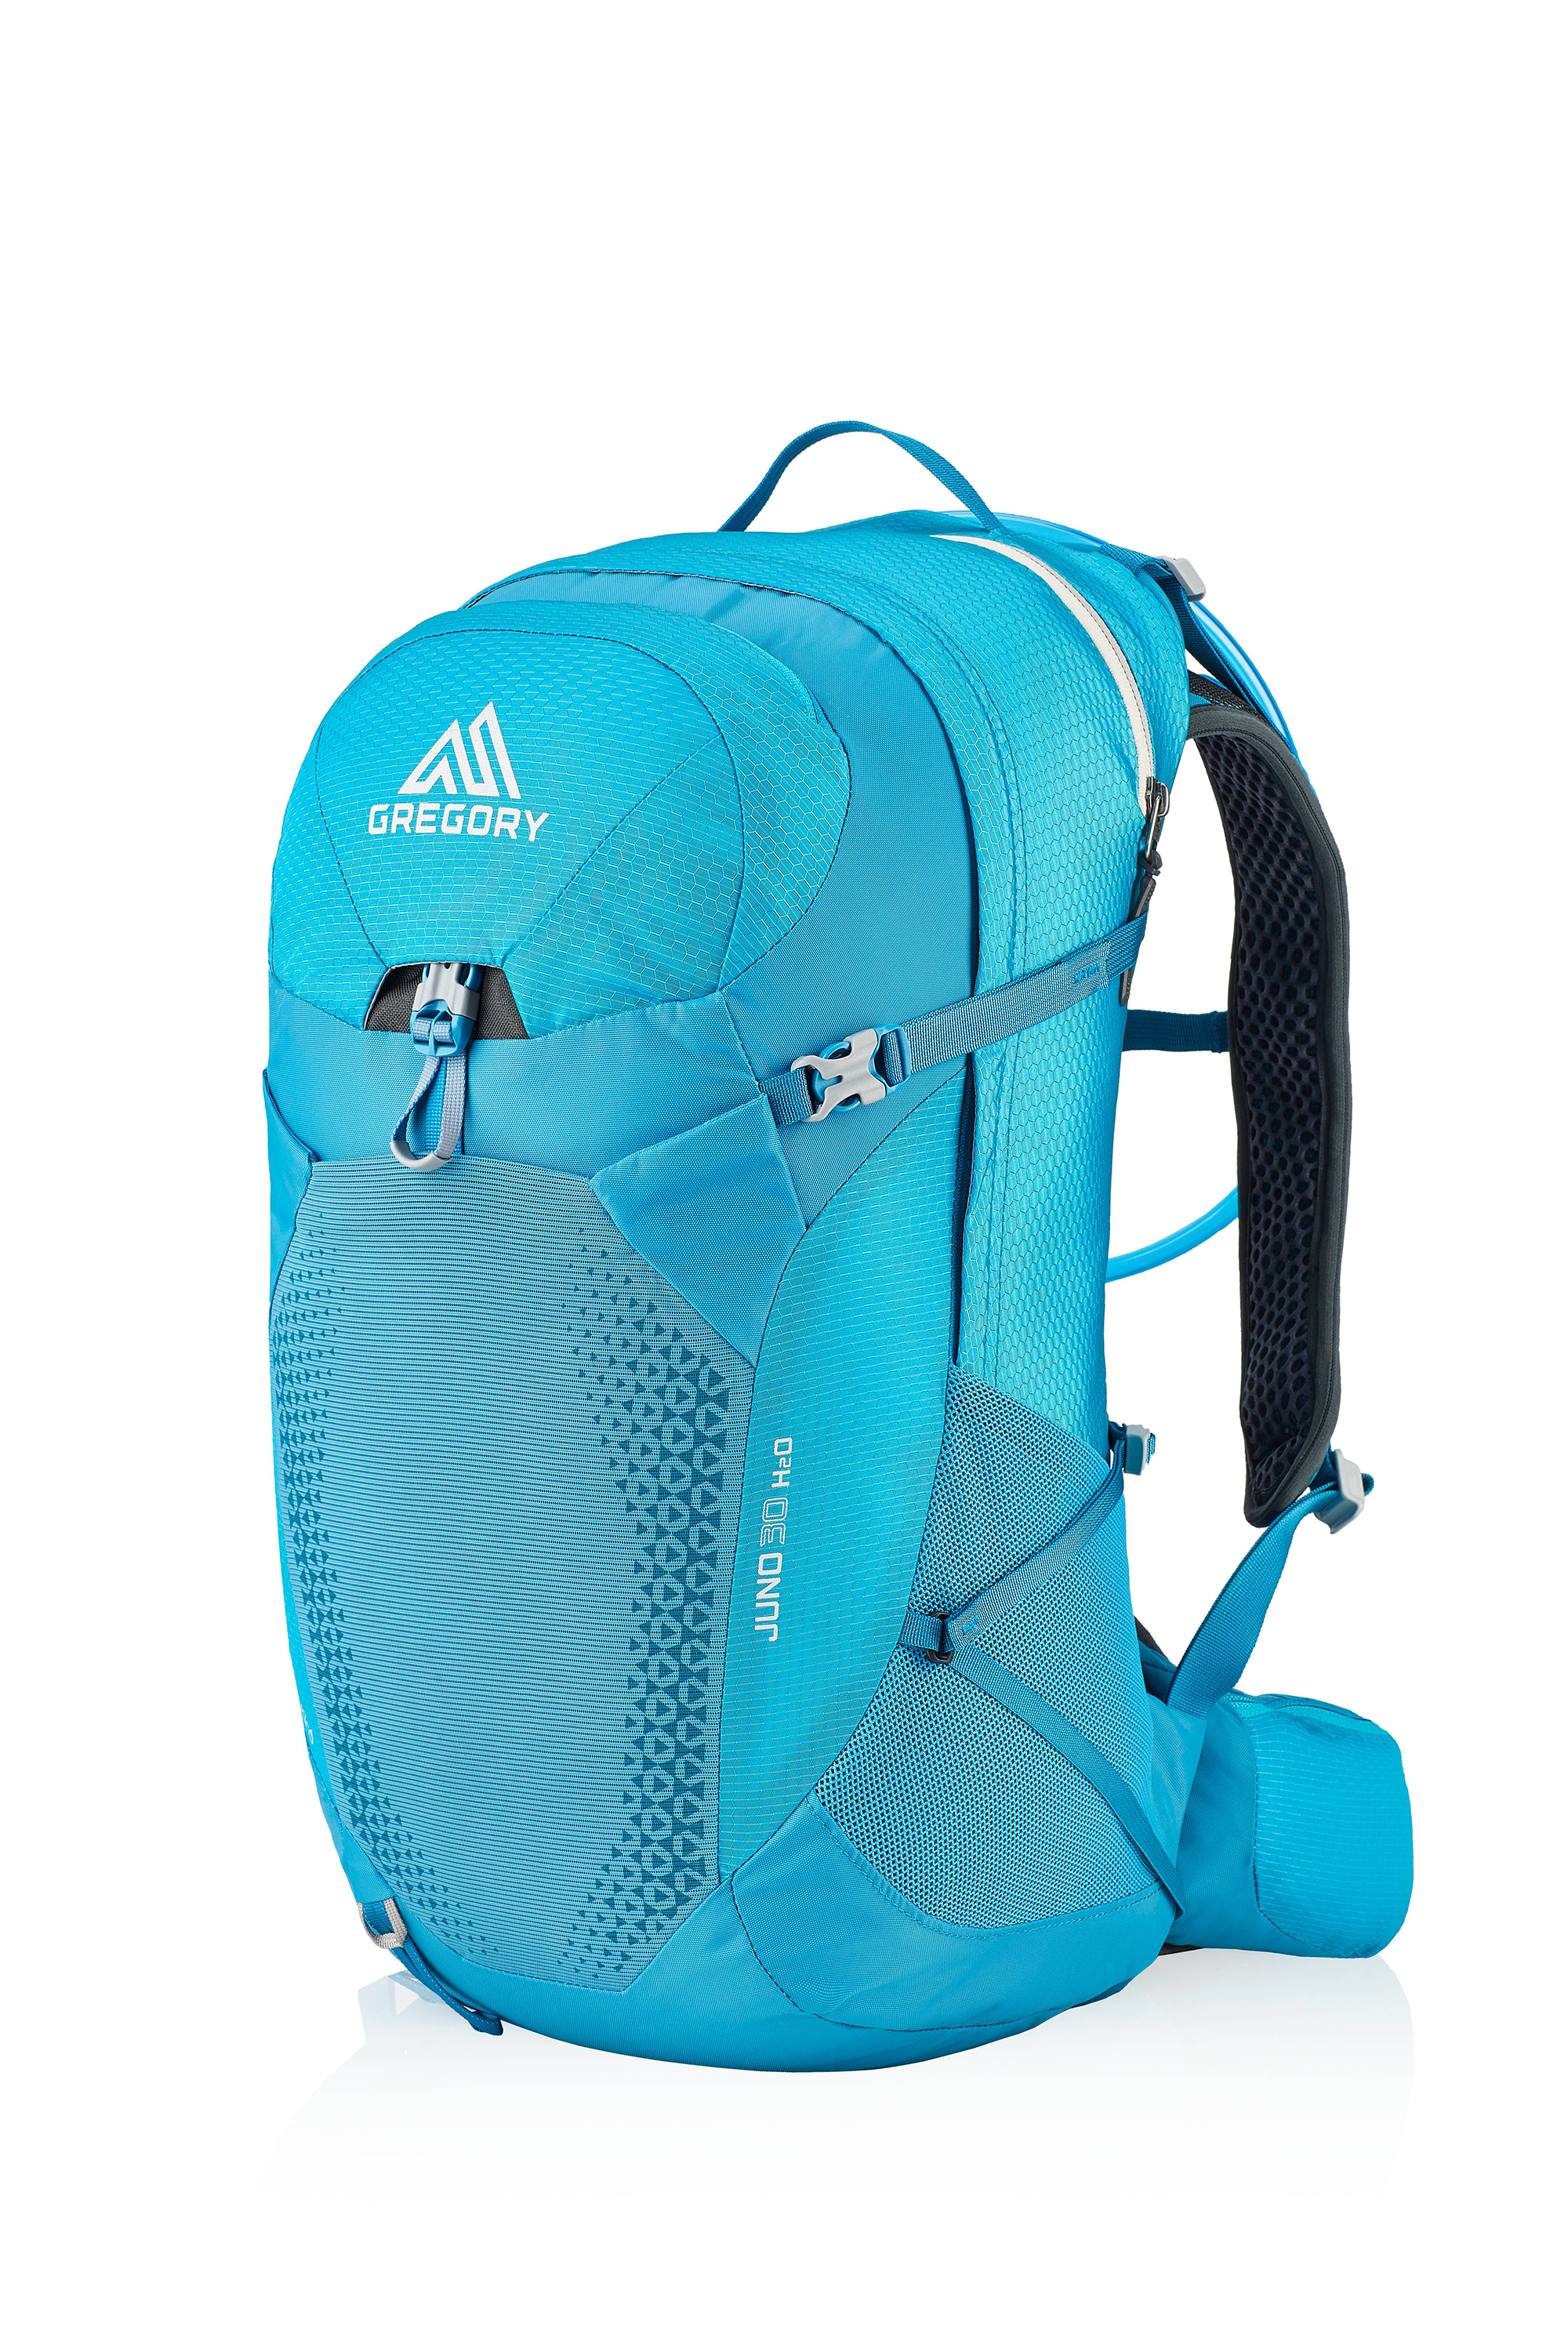 Gregory Juno 30 H2O Hydration Pack for Ladies